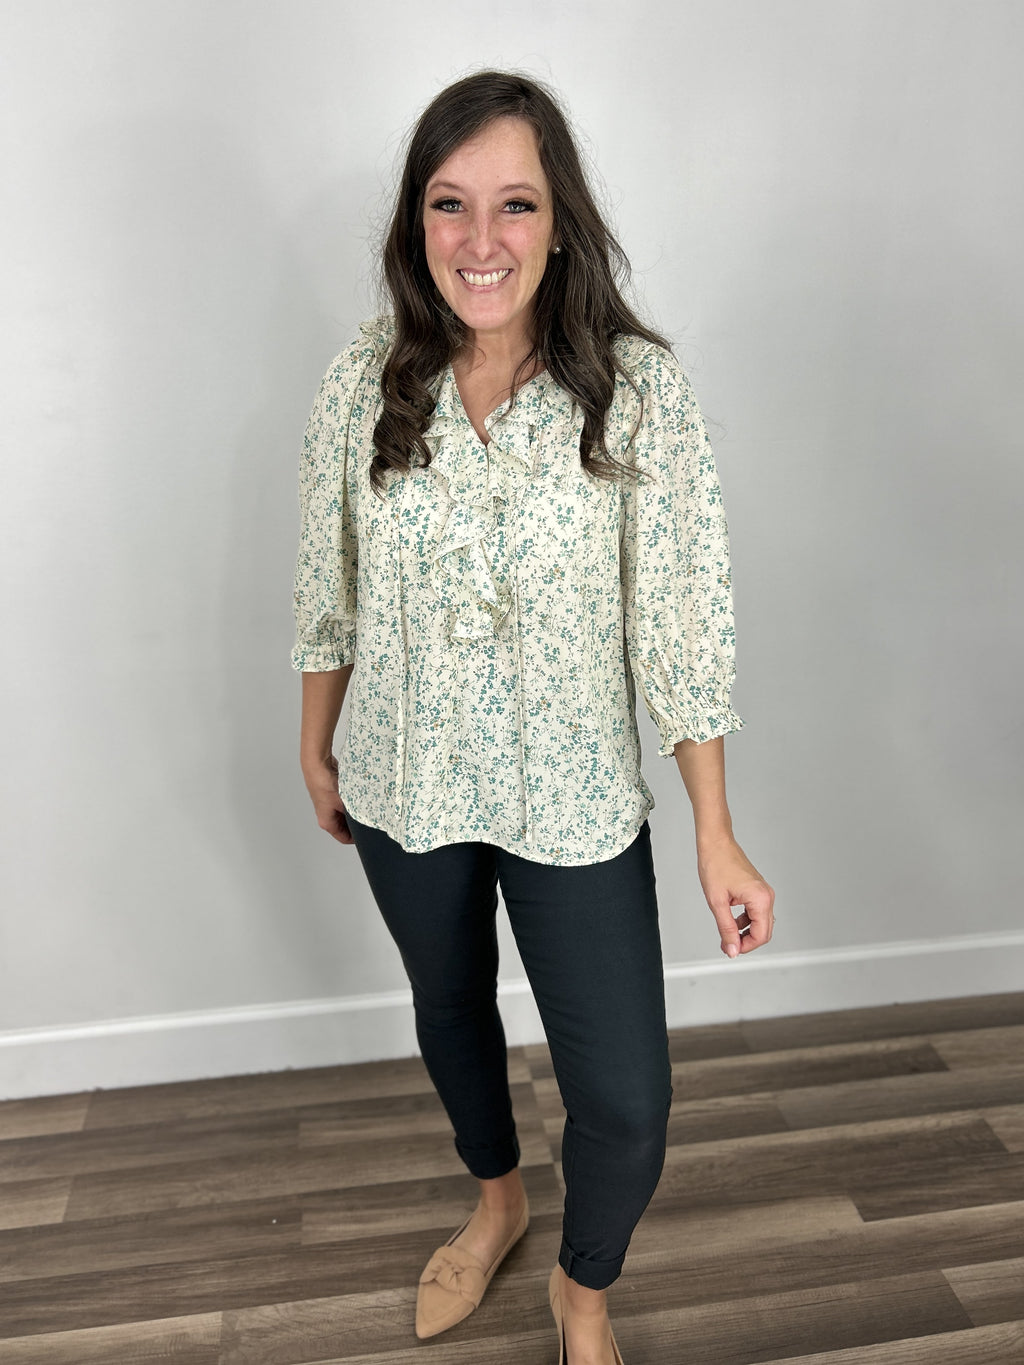 Lexie Flowery V Neck Ruffle Top paired with charcoal skinny jeans and taupe flat shoes.